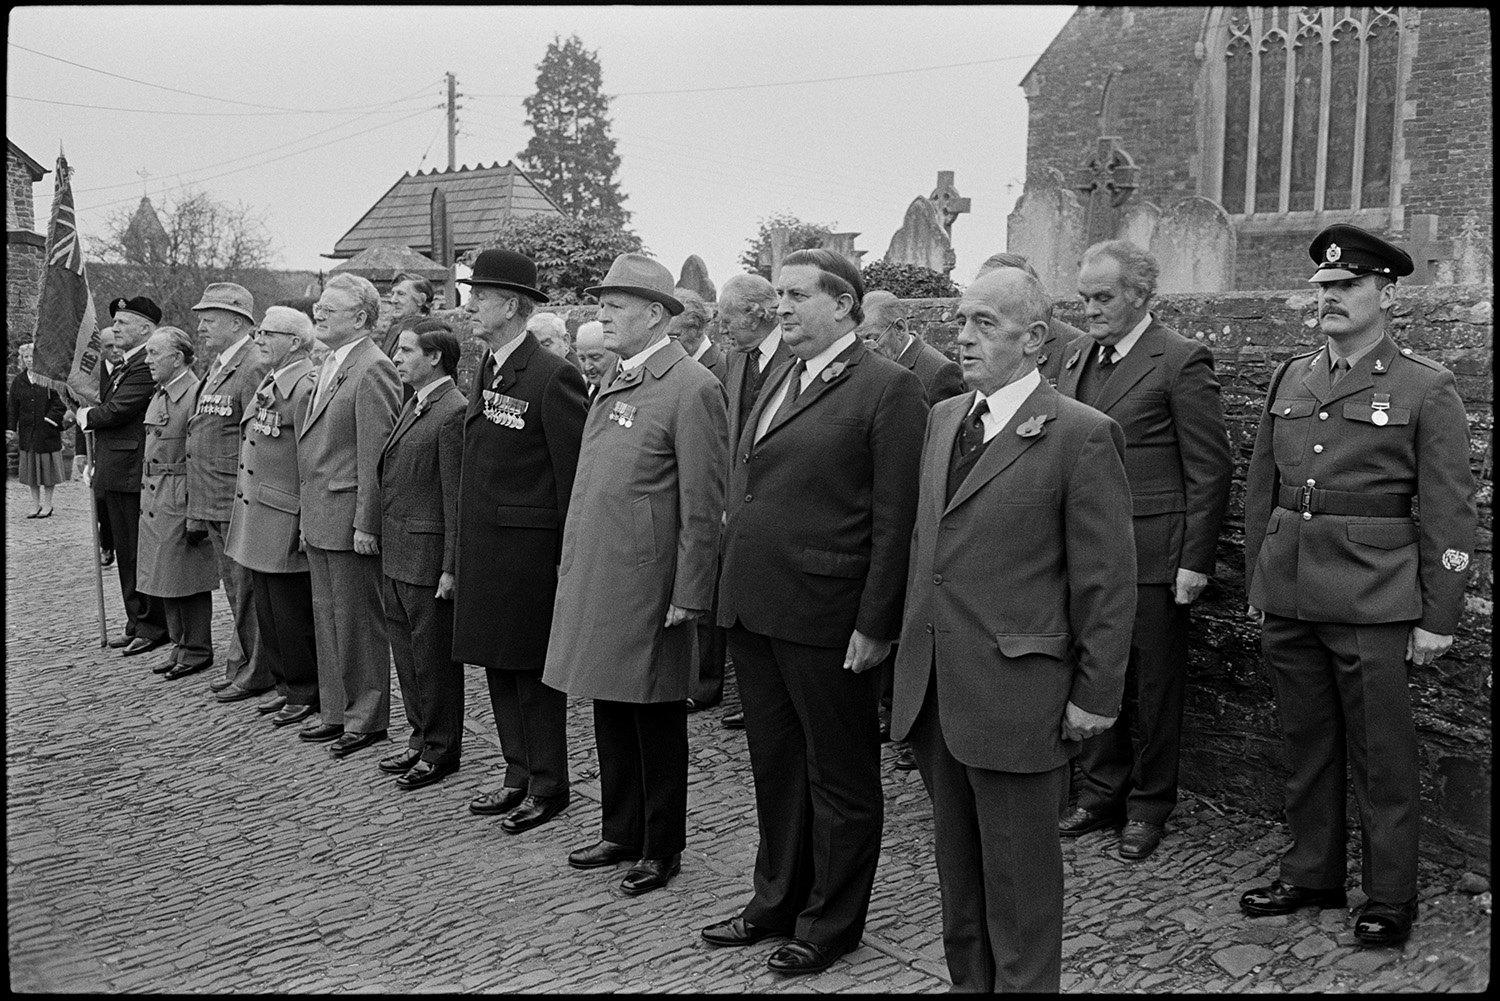 Parade at Memorial, laying wreaths by men, women and scouts, Vicar saying prayers.
[Men standing on a cobbled path outside Chulmleigh Church for the two minute silence on Remembrance Sunday or Armistice Day. They are wearing poppies and some of them are wearing medals and uniforms.]